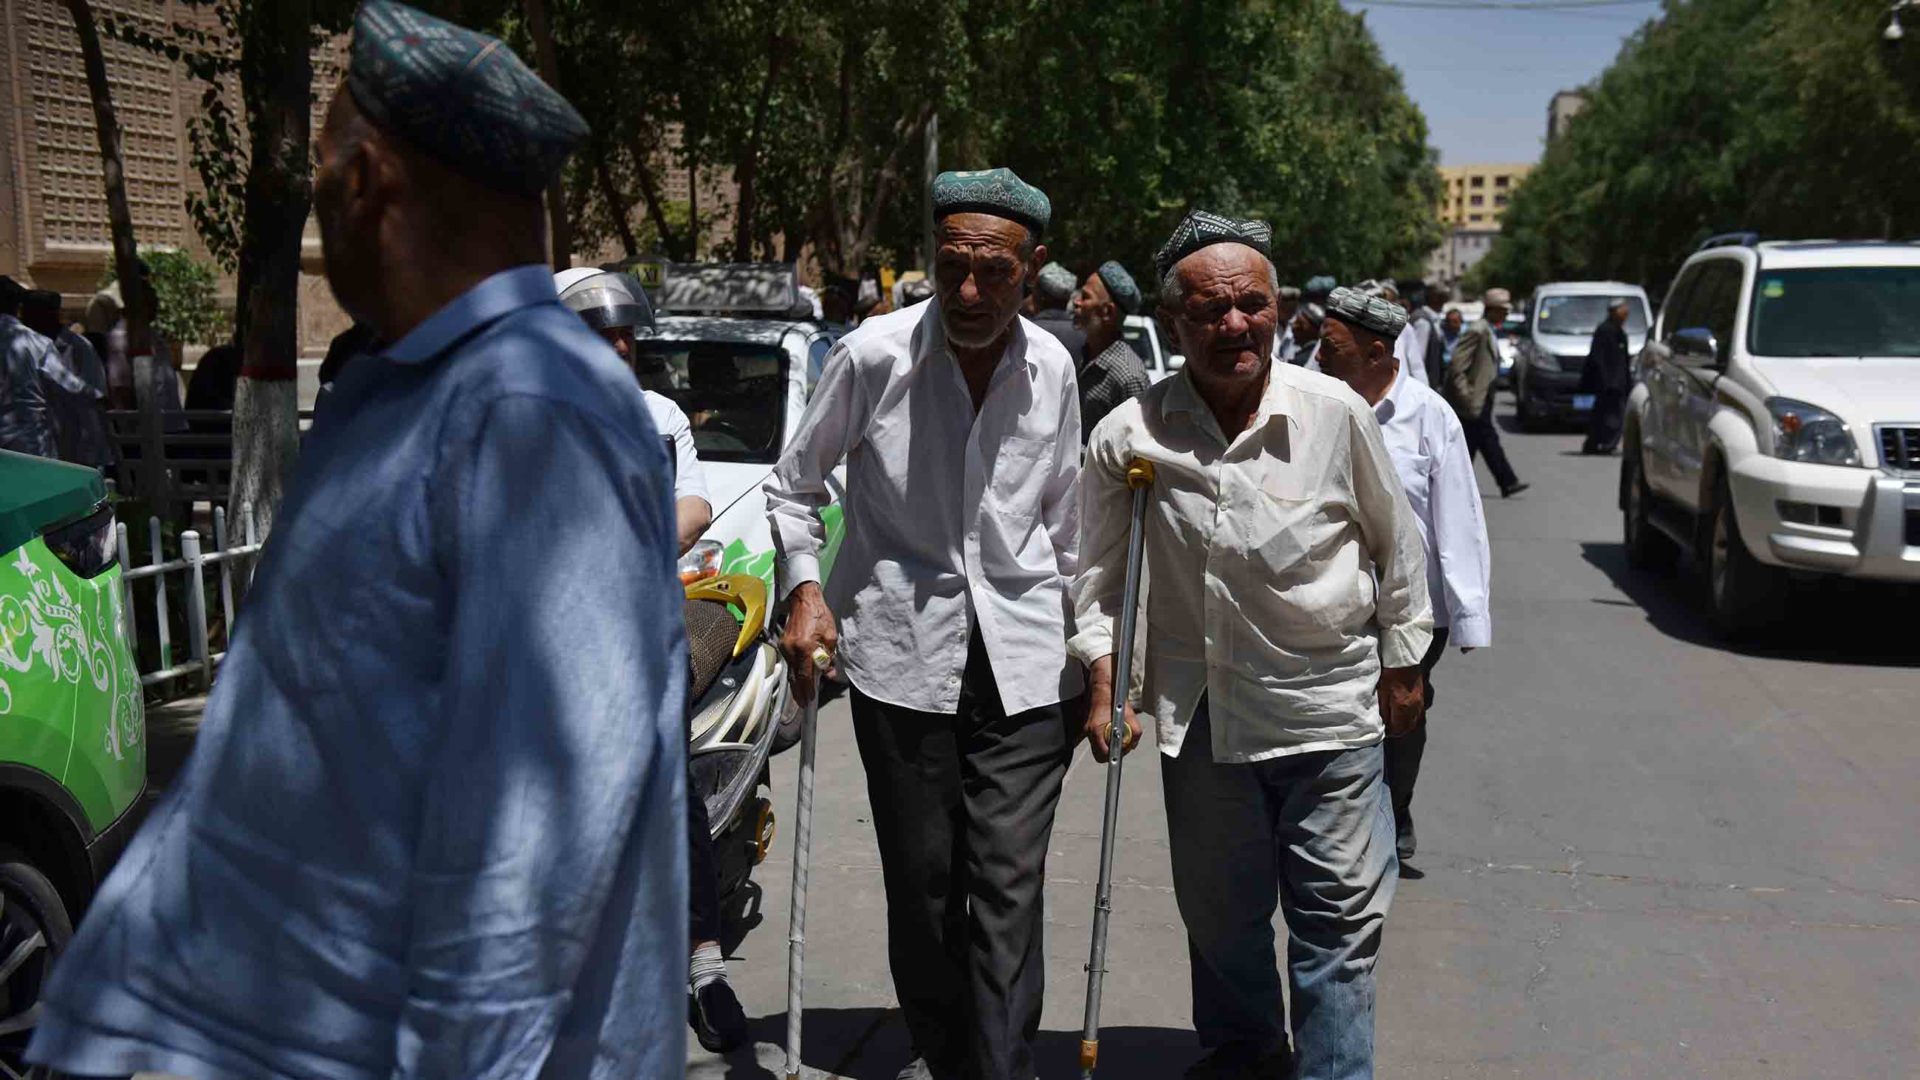 Uighur men leaving a mosque after prayers in Hotan in China's northwest Xinjiang region on May 31, 2019.